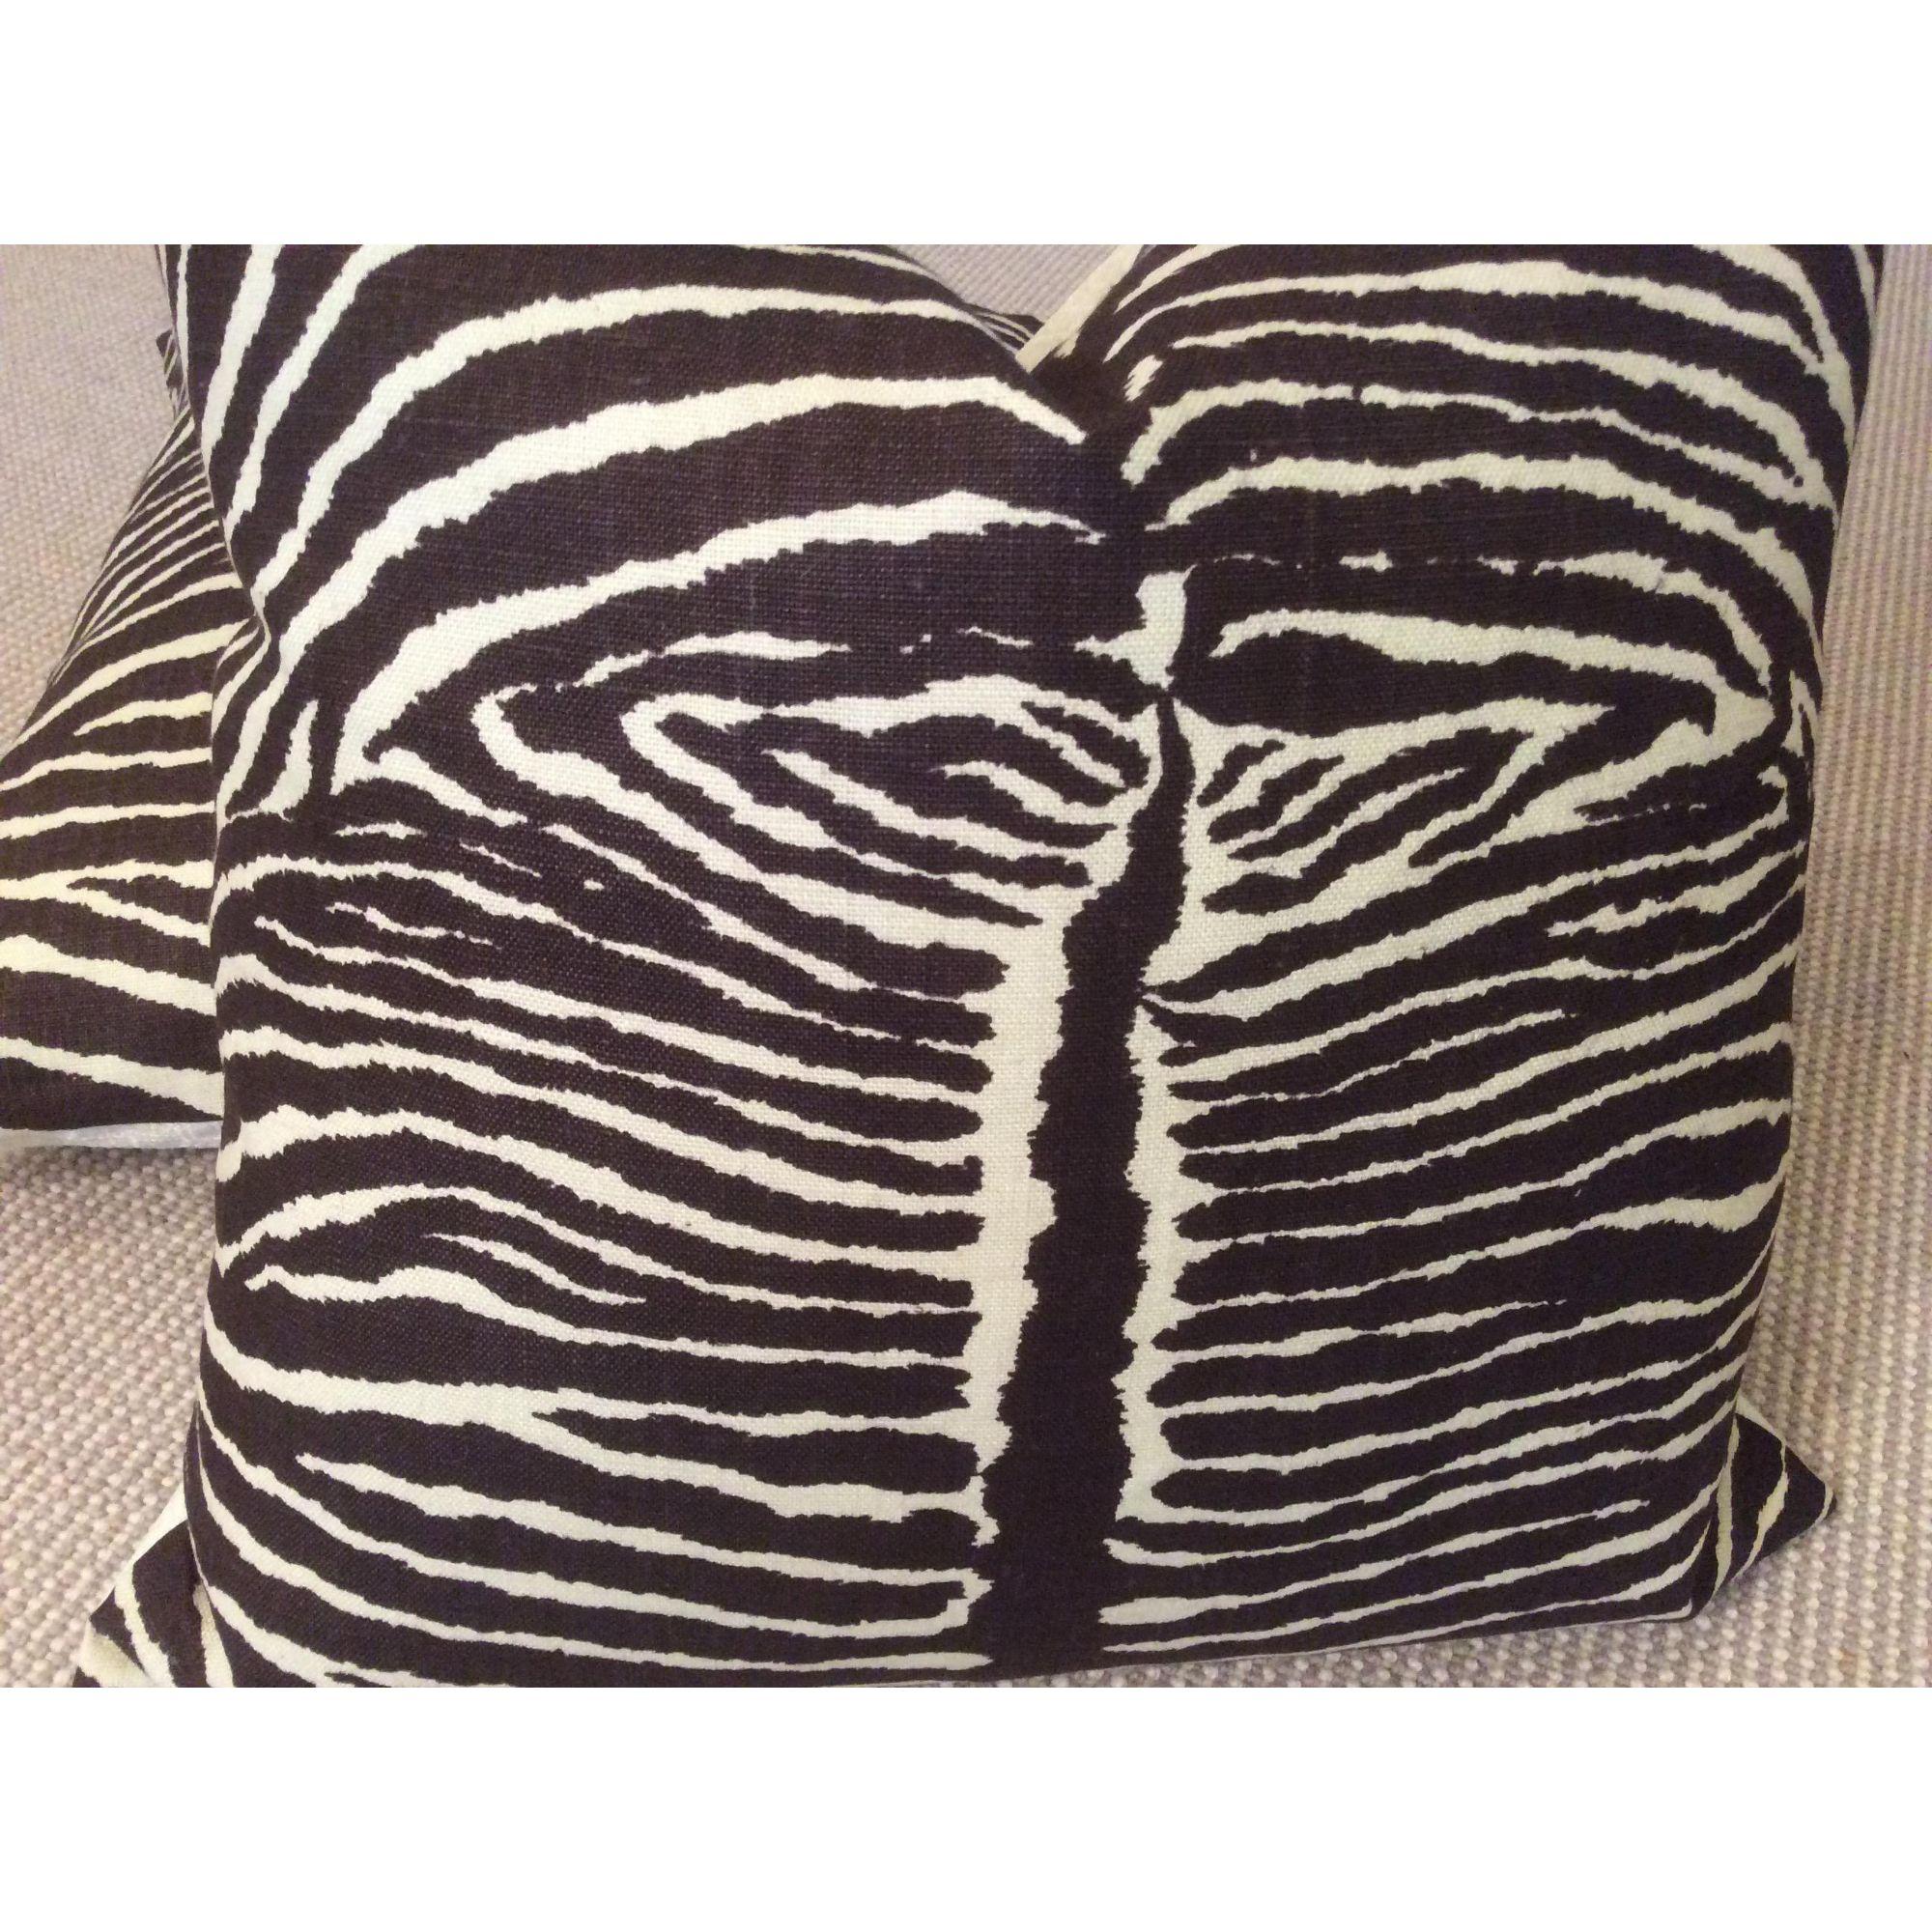 Gorgeous 100% linen in animal print zebra from Brunschwig and Fils. Official color is 